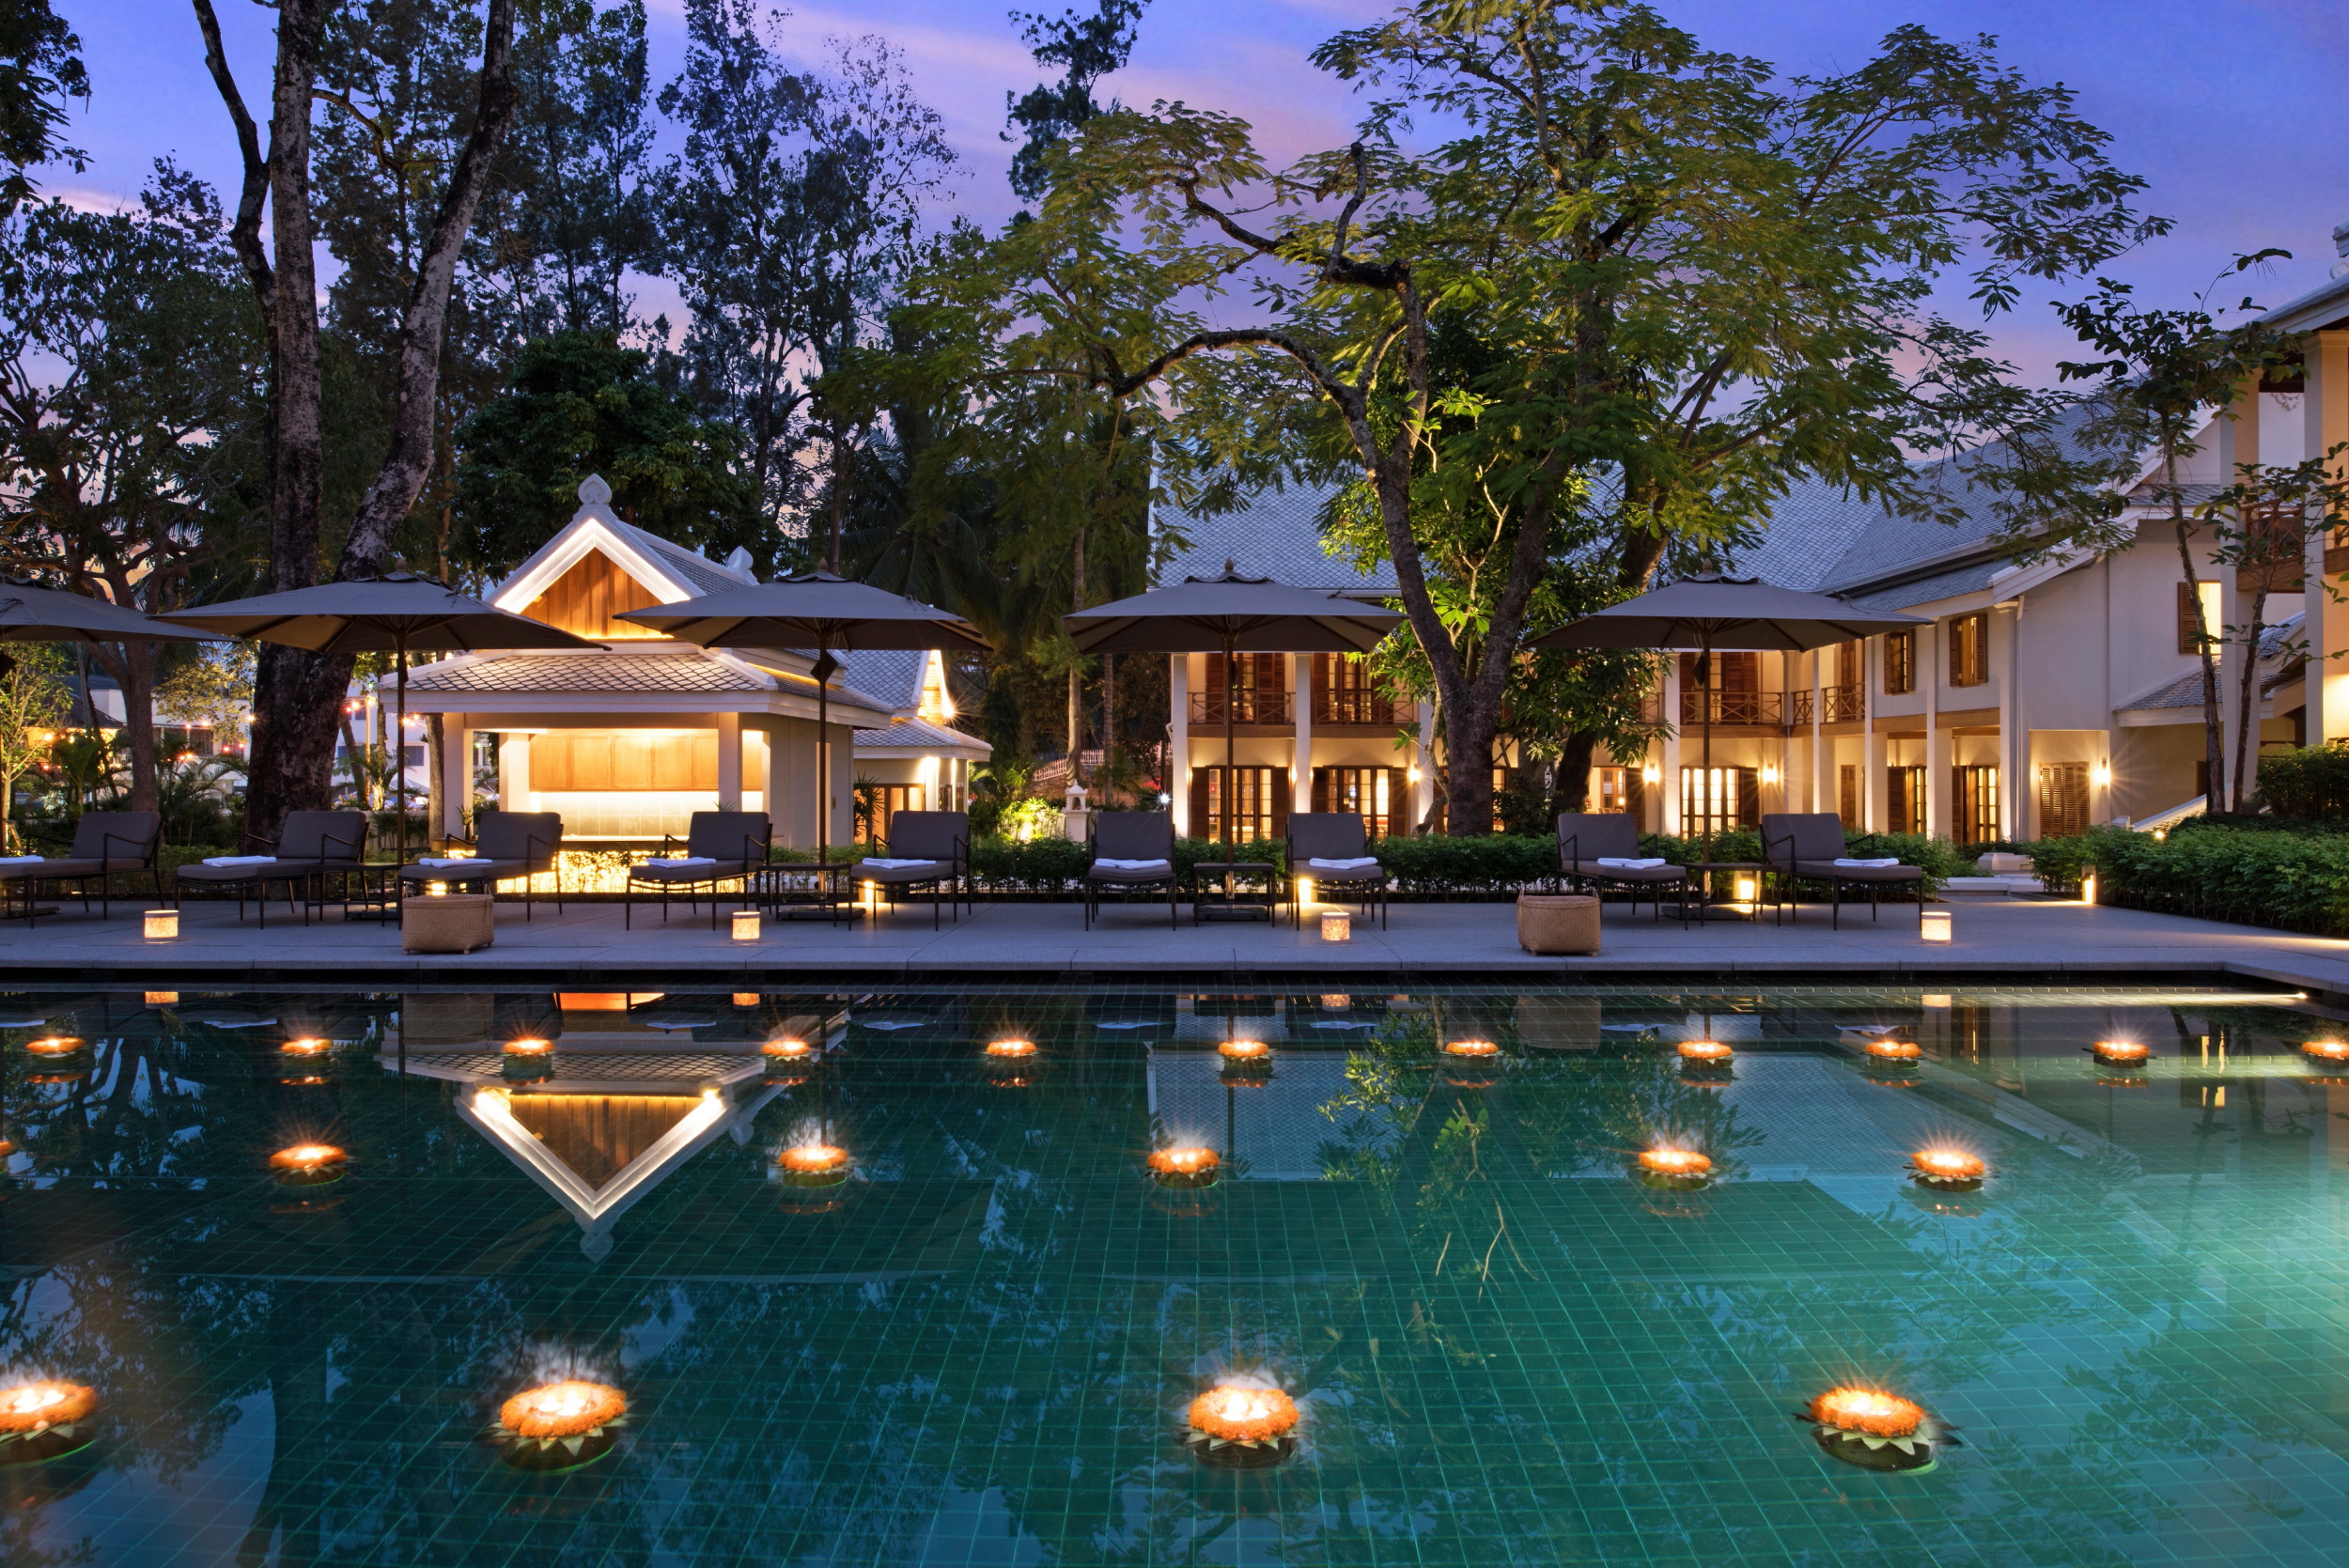 Luxurious living in Luang Prabang, Laos. The Azerai Hotel will be rebranded as the Avani Luang Prabang in march 2018. Click to enlarge.